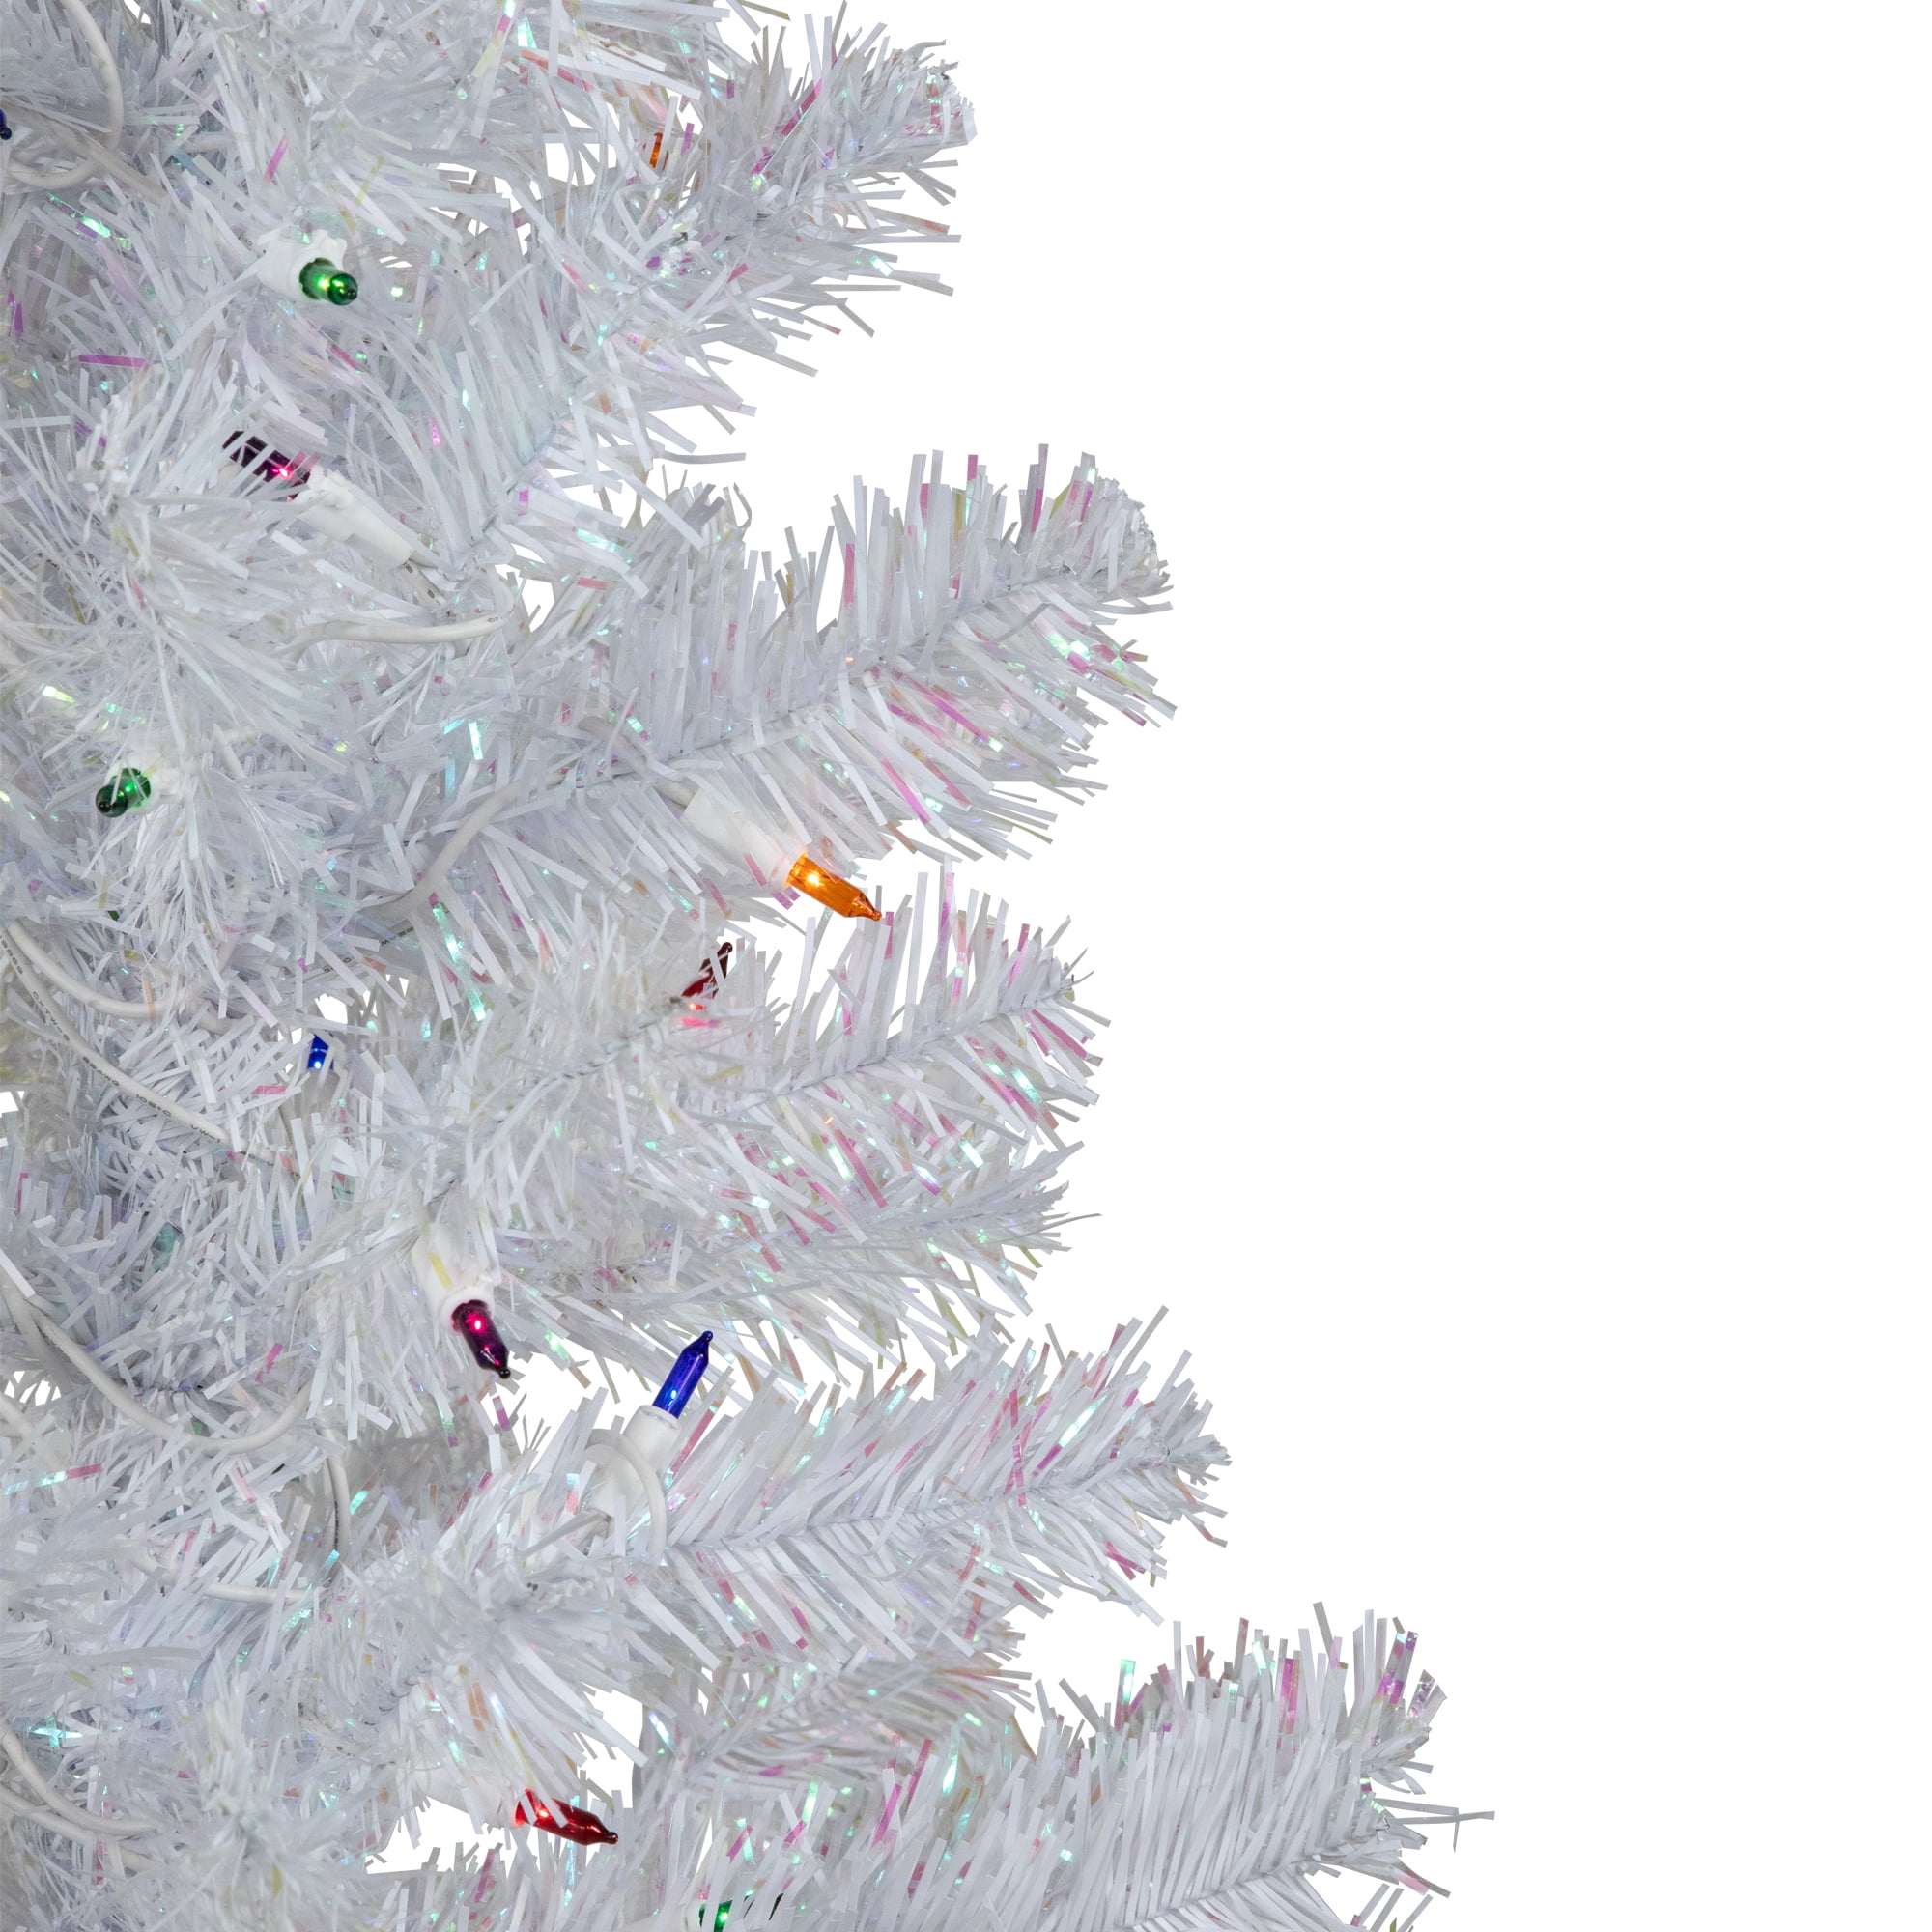 Northlight 4' White Iridescent Pine Artificial Christmas Tree - Unlit,  1.0000 - Fred Meyer